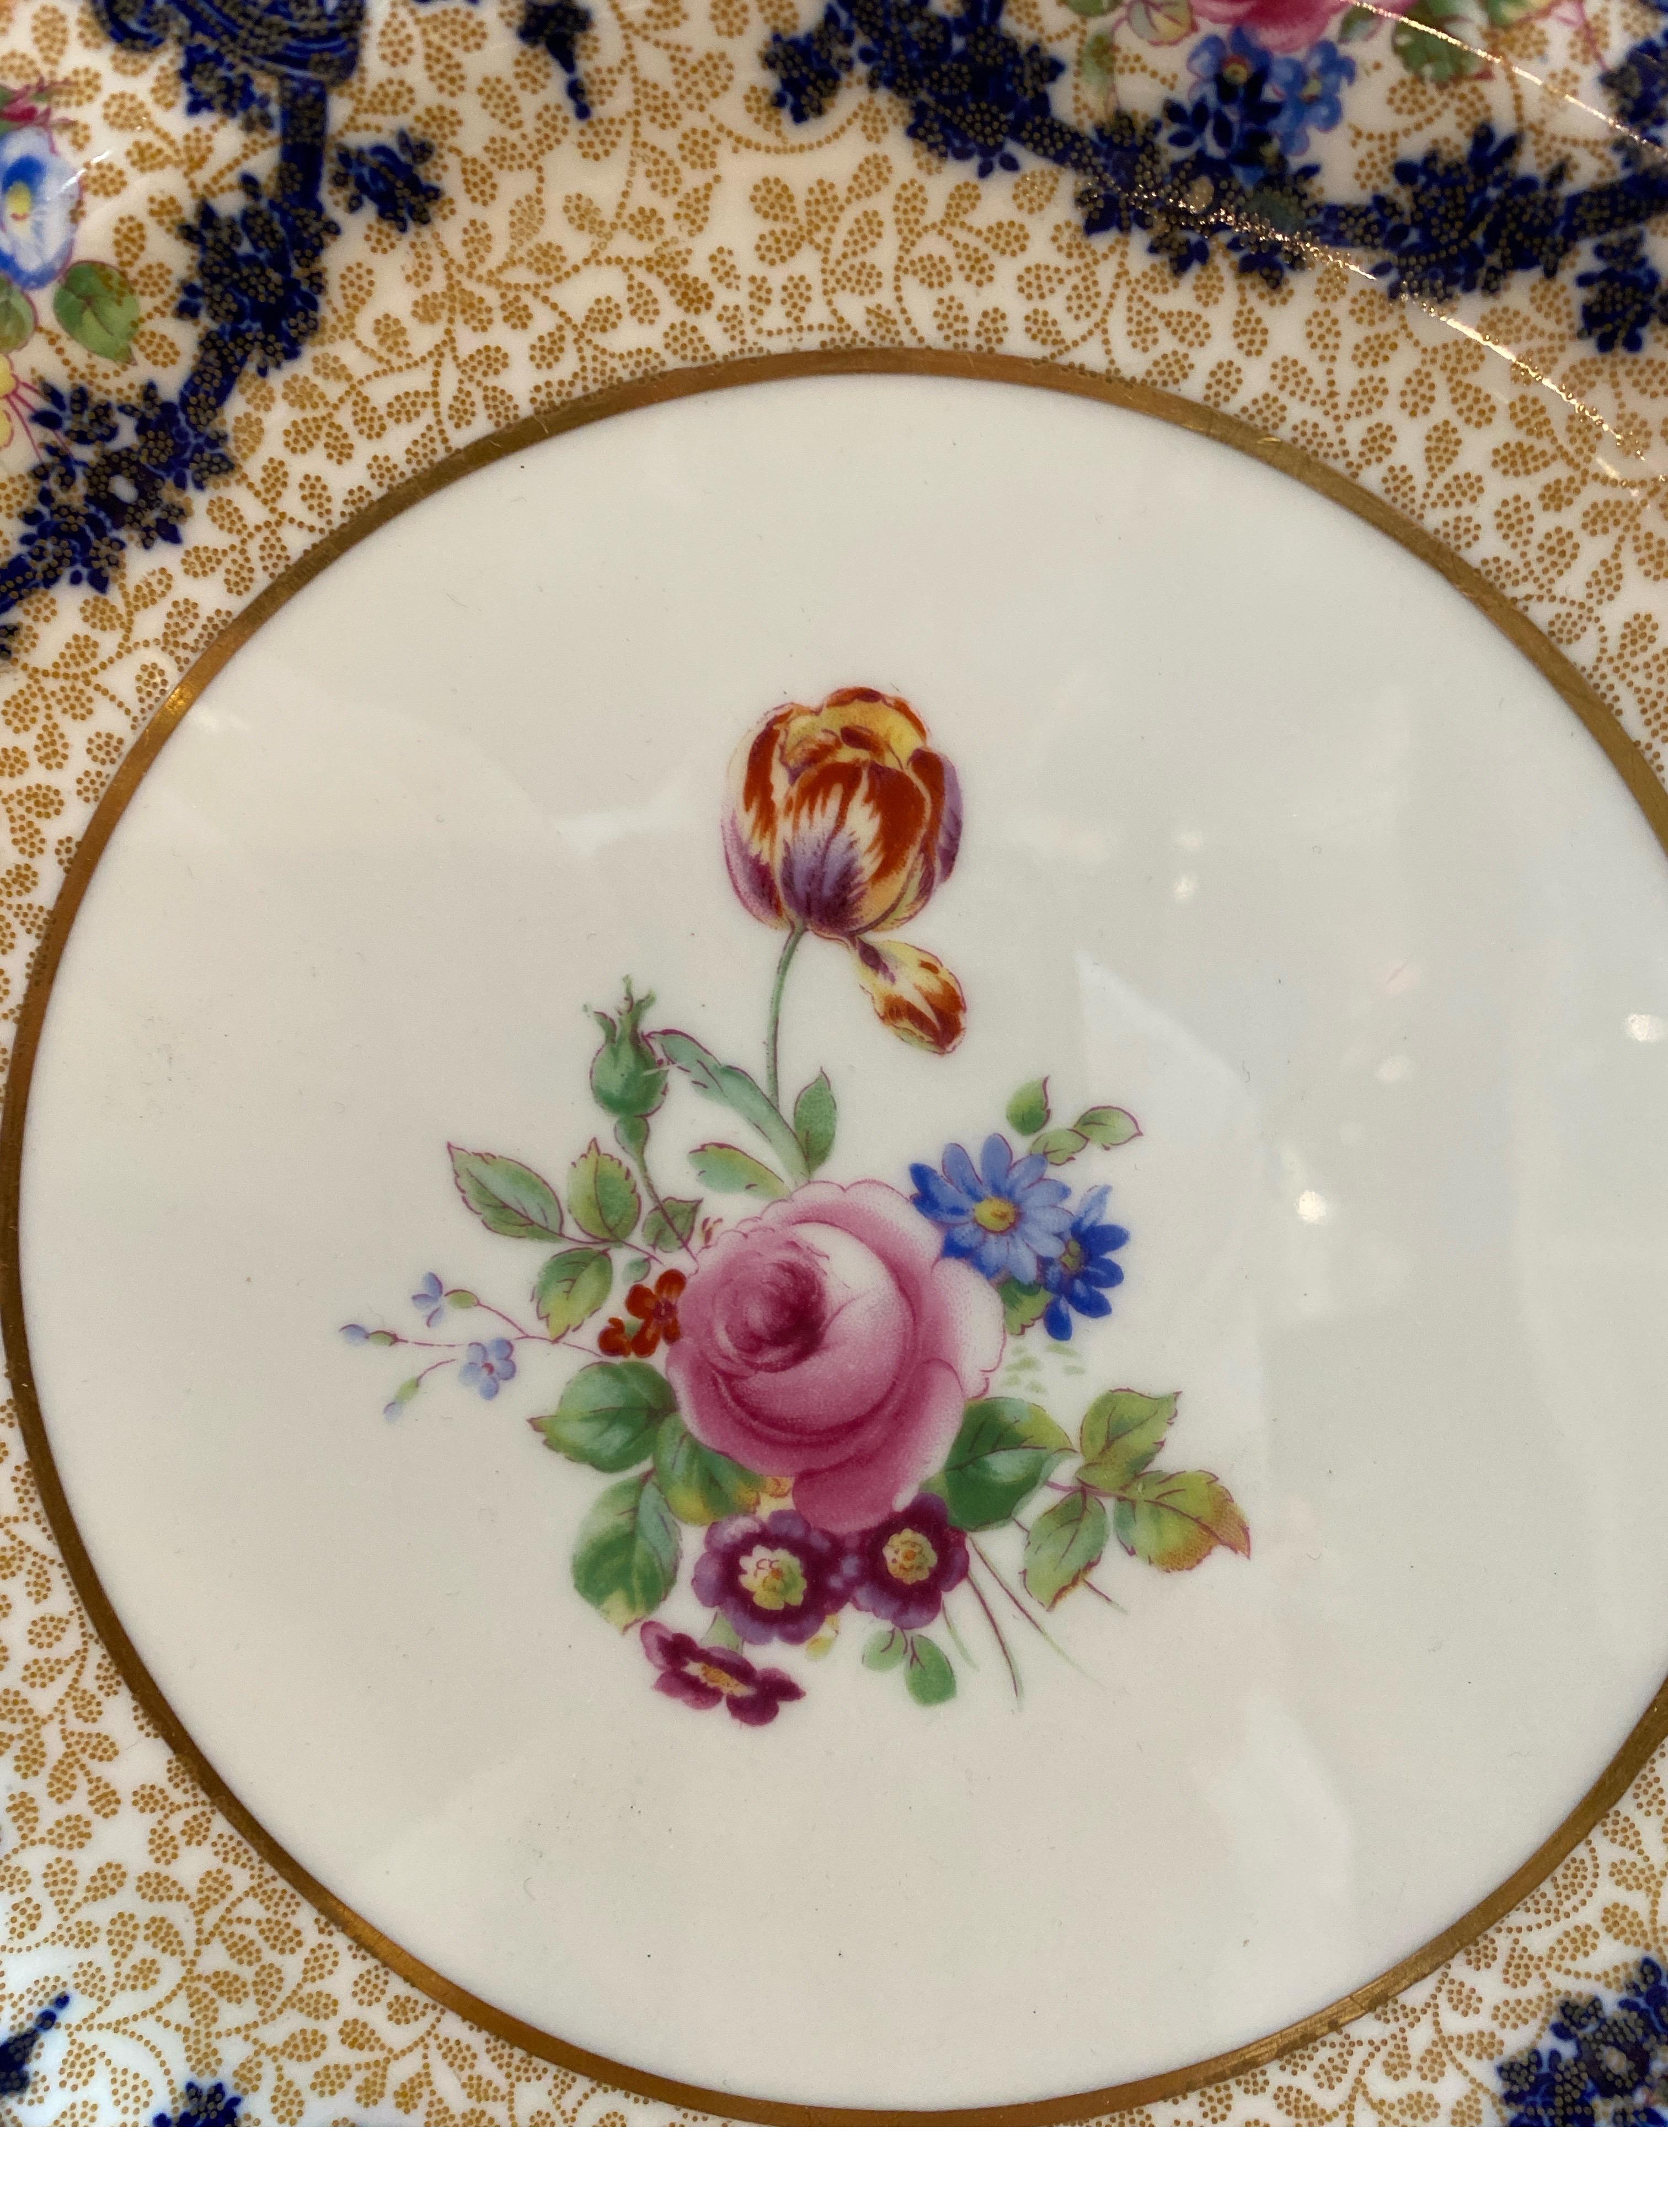 Edwardian A Set of 10 Hand Painted Antique Service Plates by Royal Doulton Circa 1915 For Sale